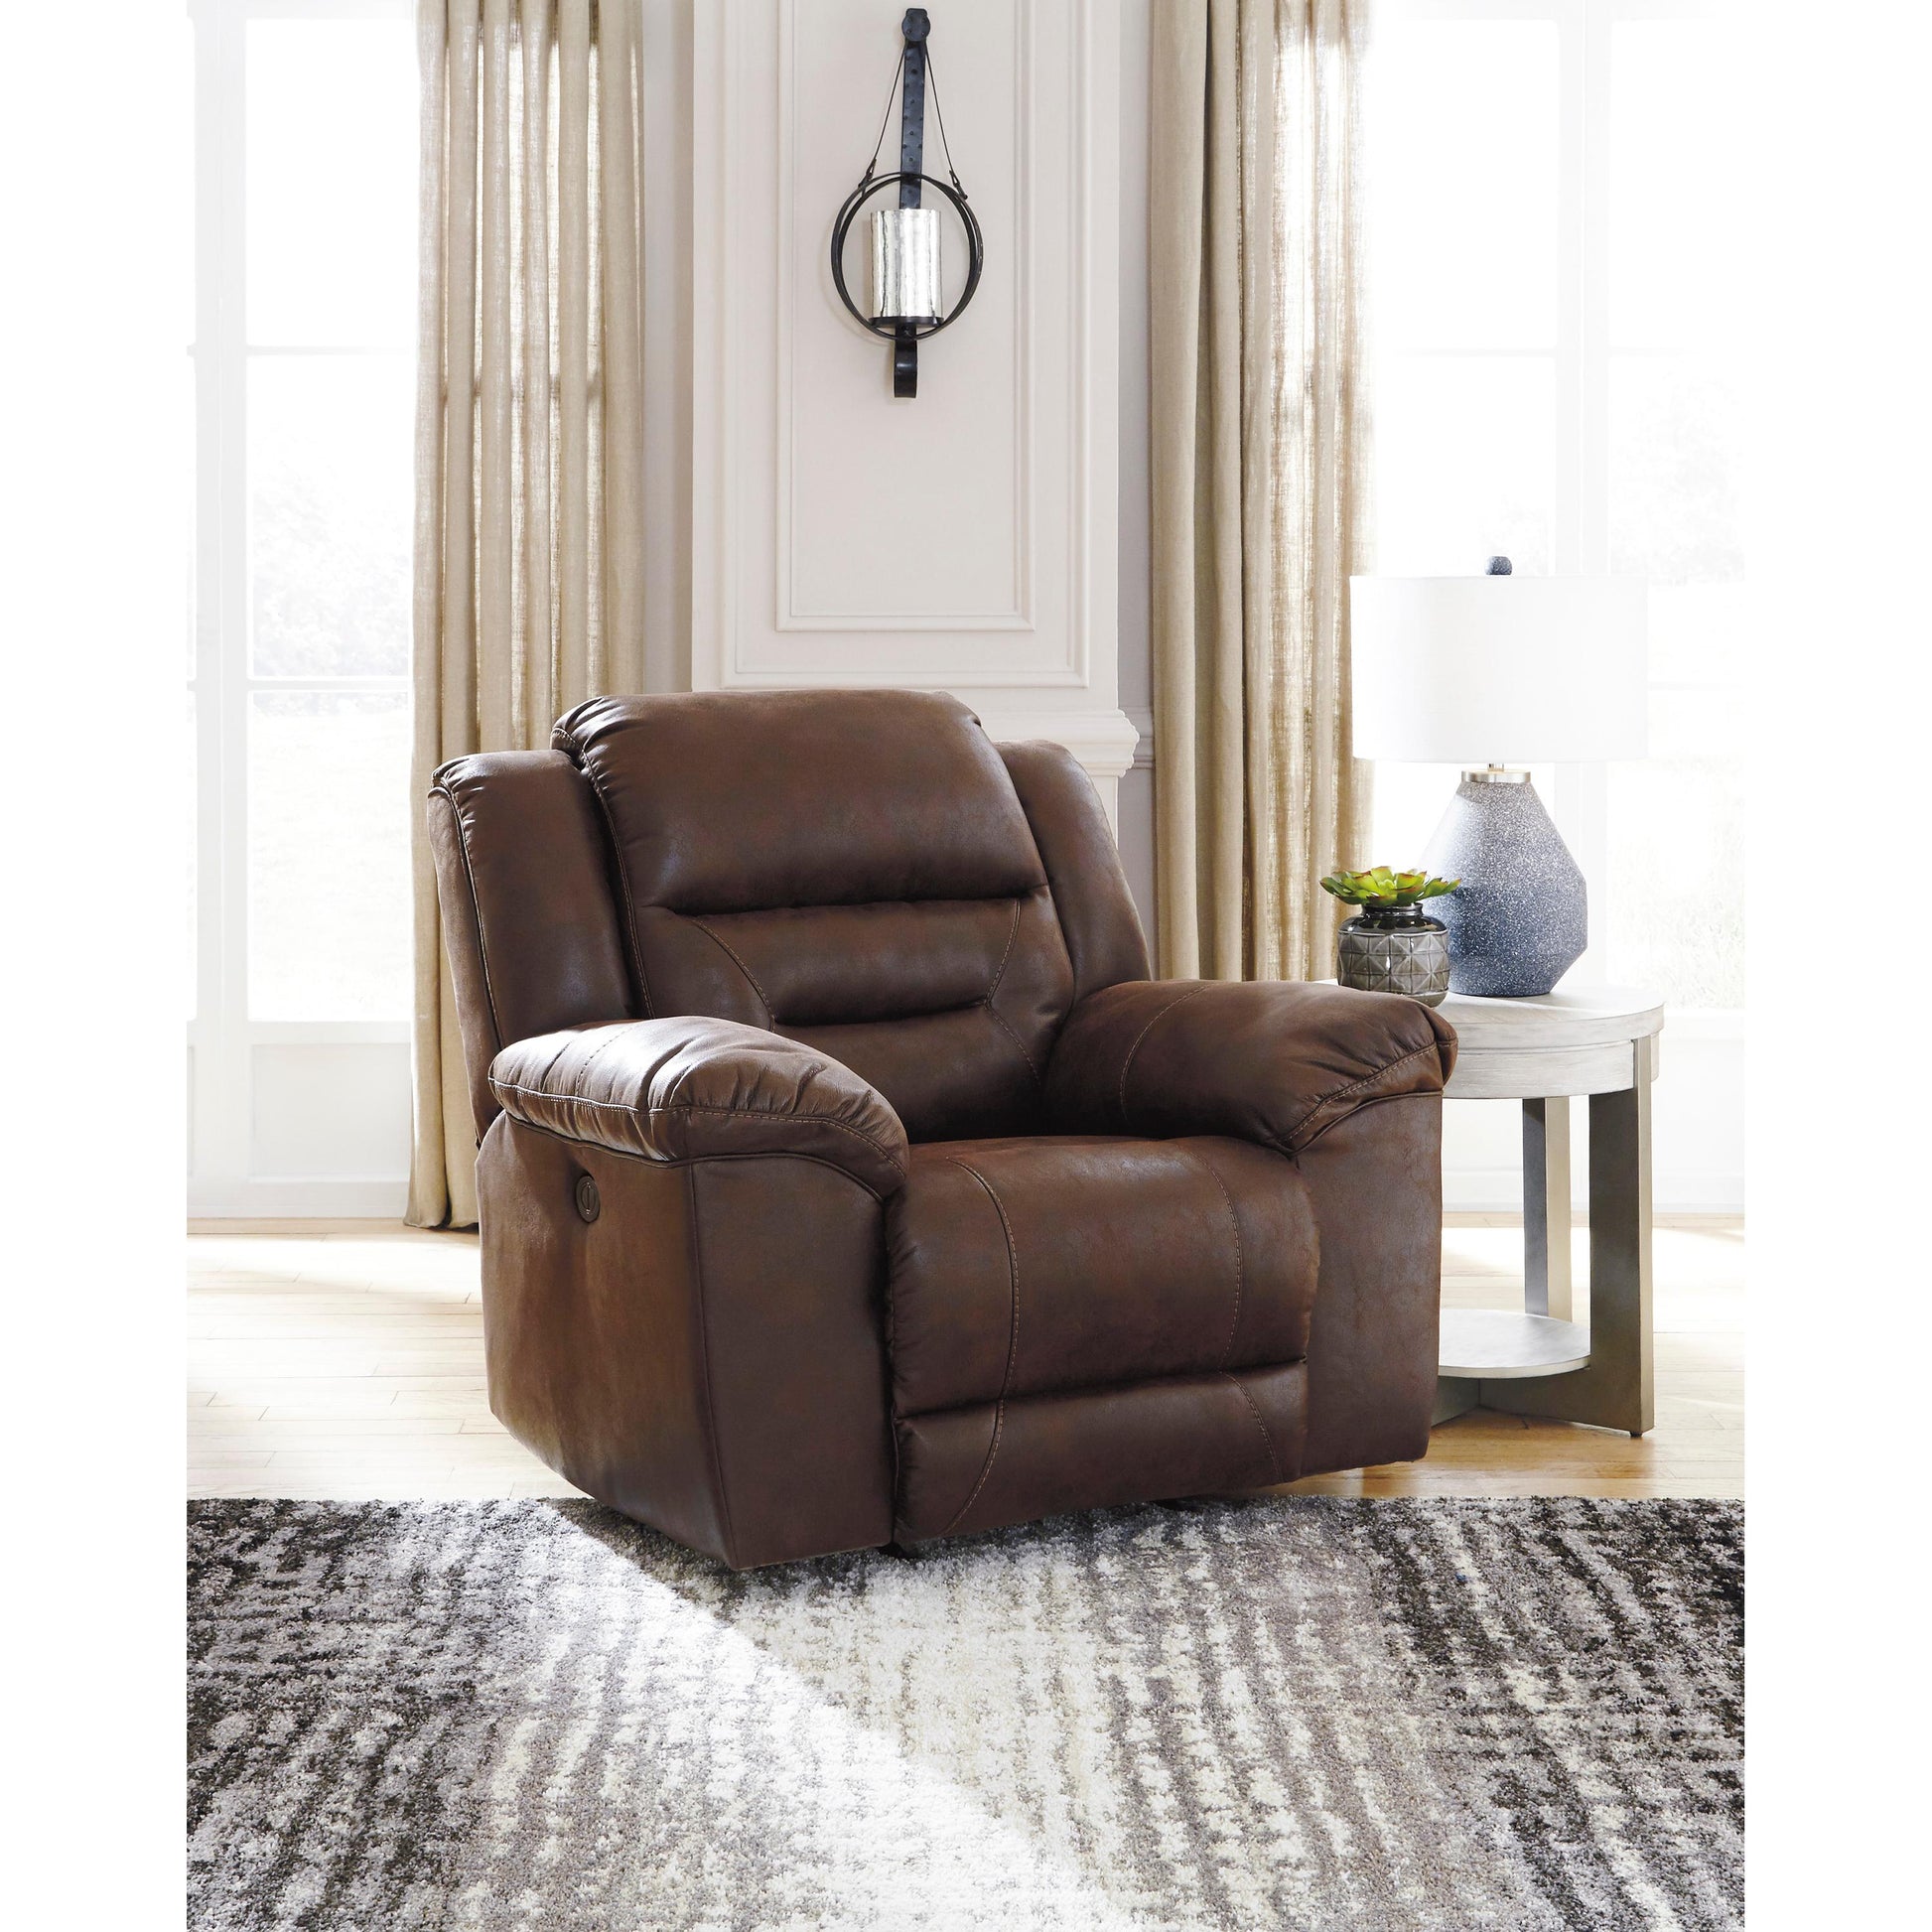 Signature Design by Ashley Stoneland Power Rocker Leather Look Recliner 3990498 IMAGE 5